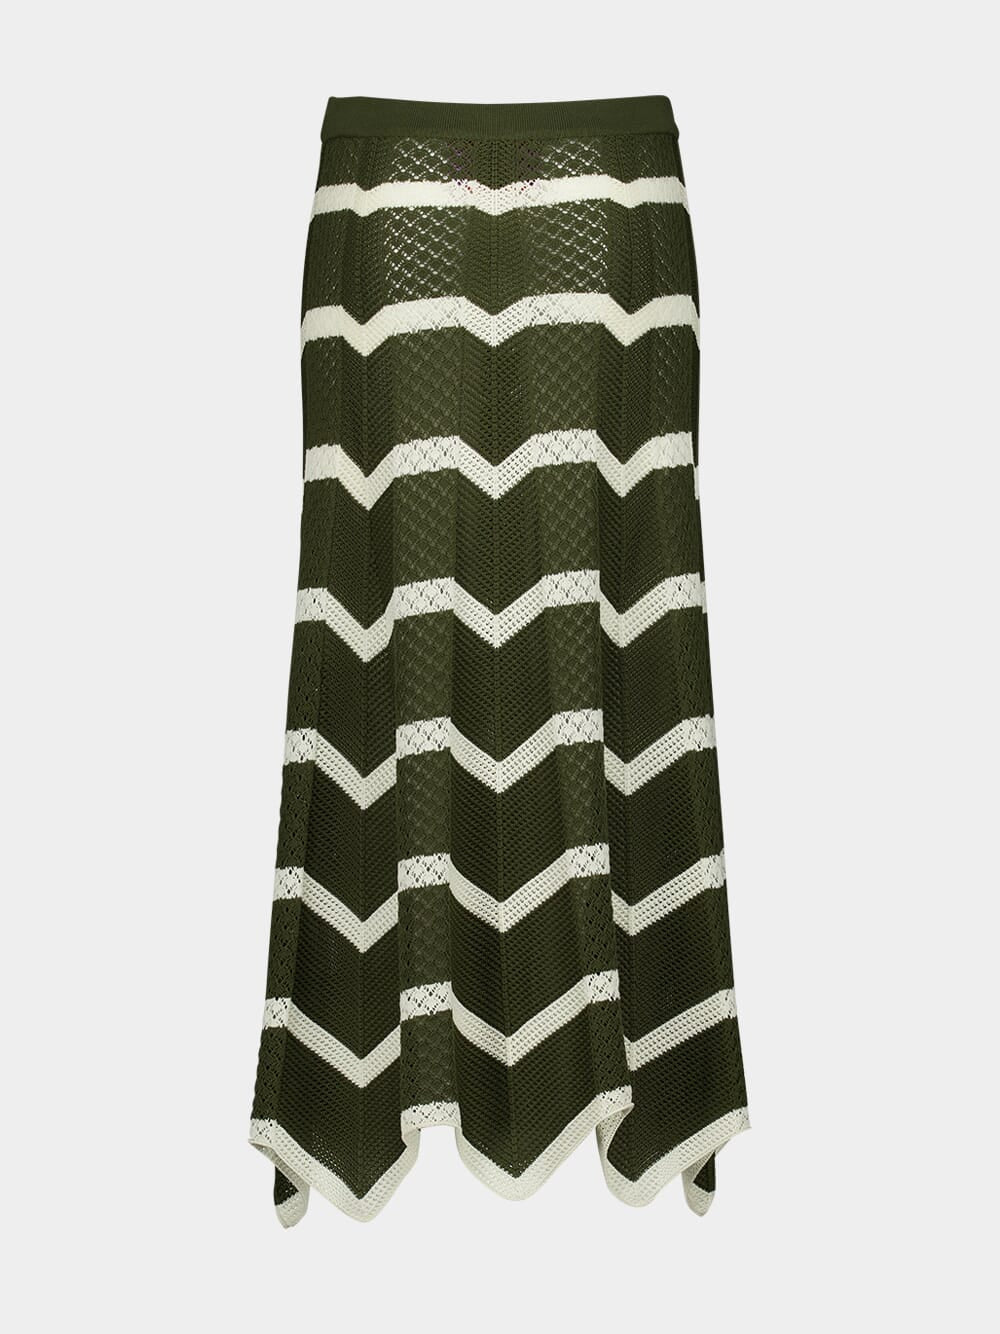 Solid Camouflage Chevron Skirt